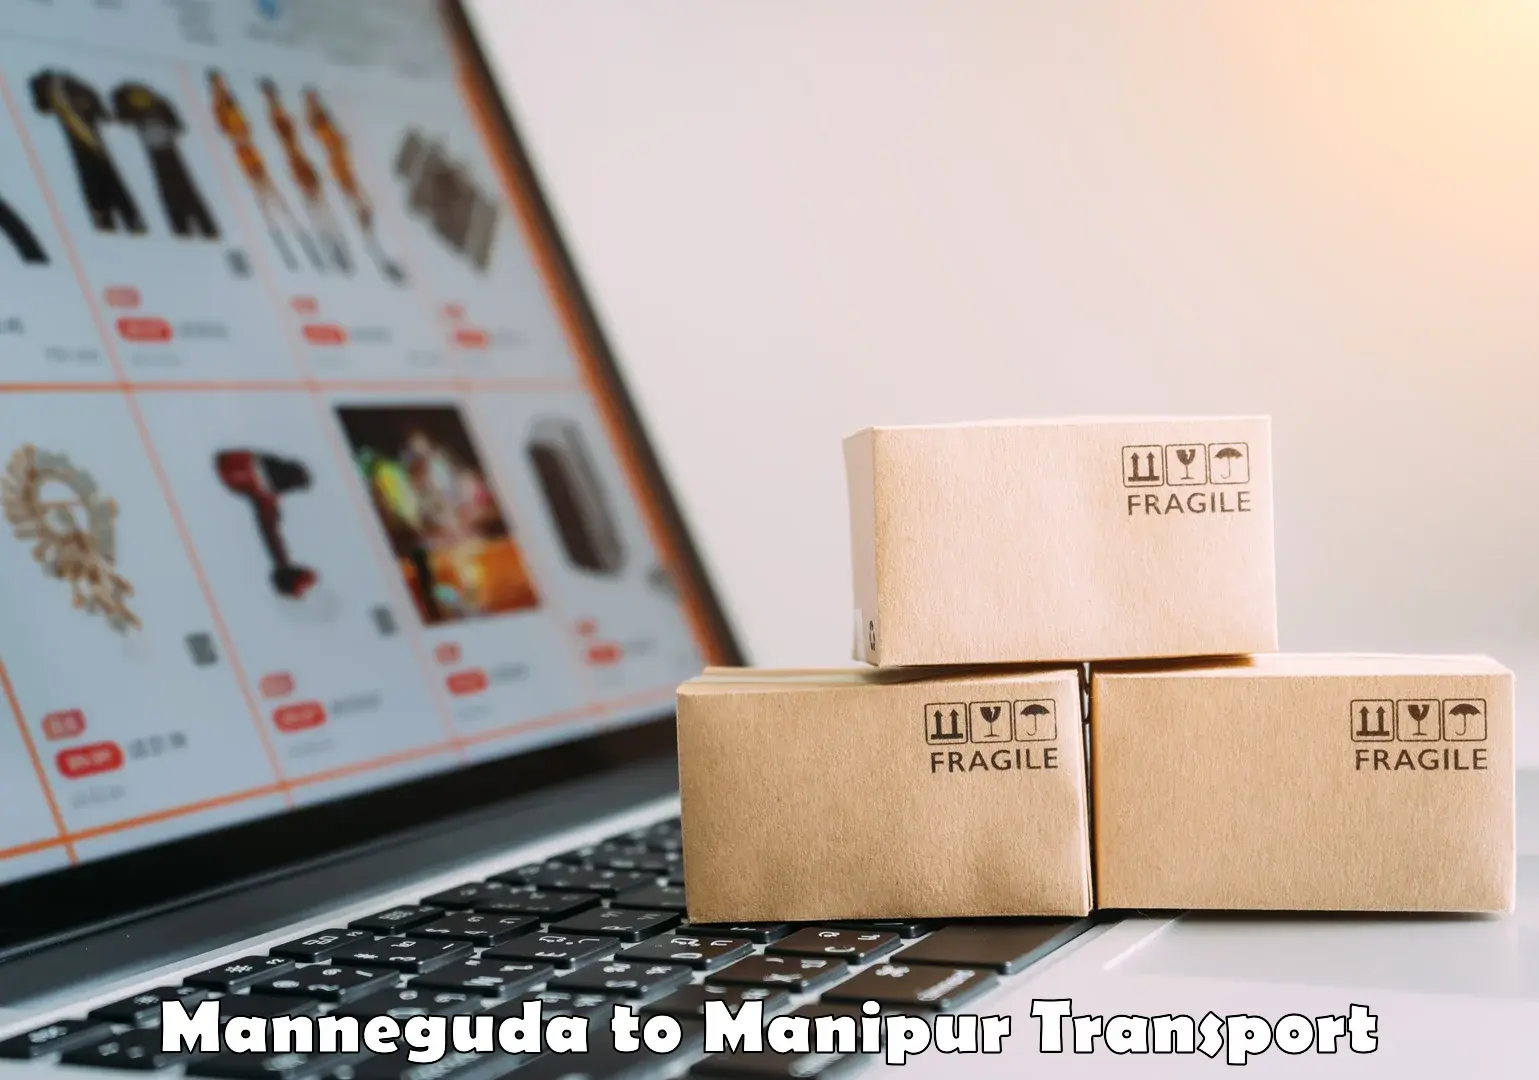 Container transport service Manneguda to Manipur